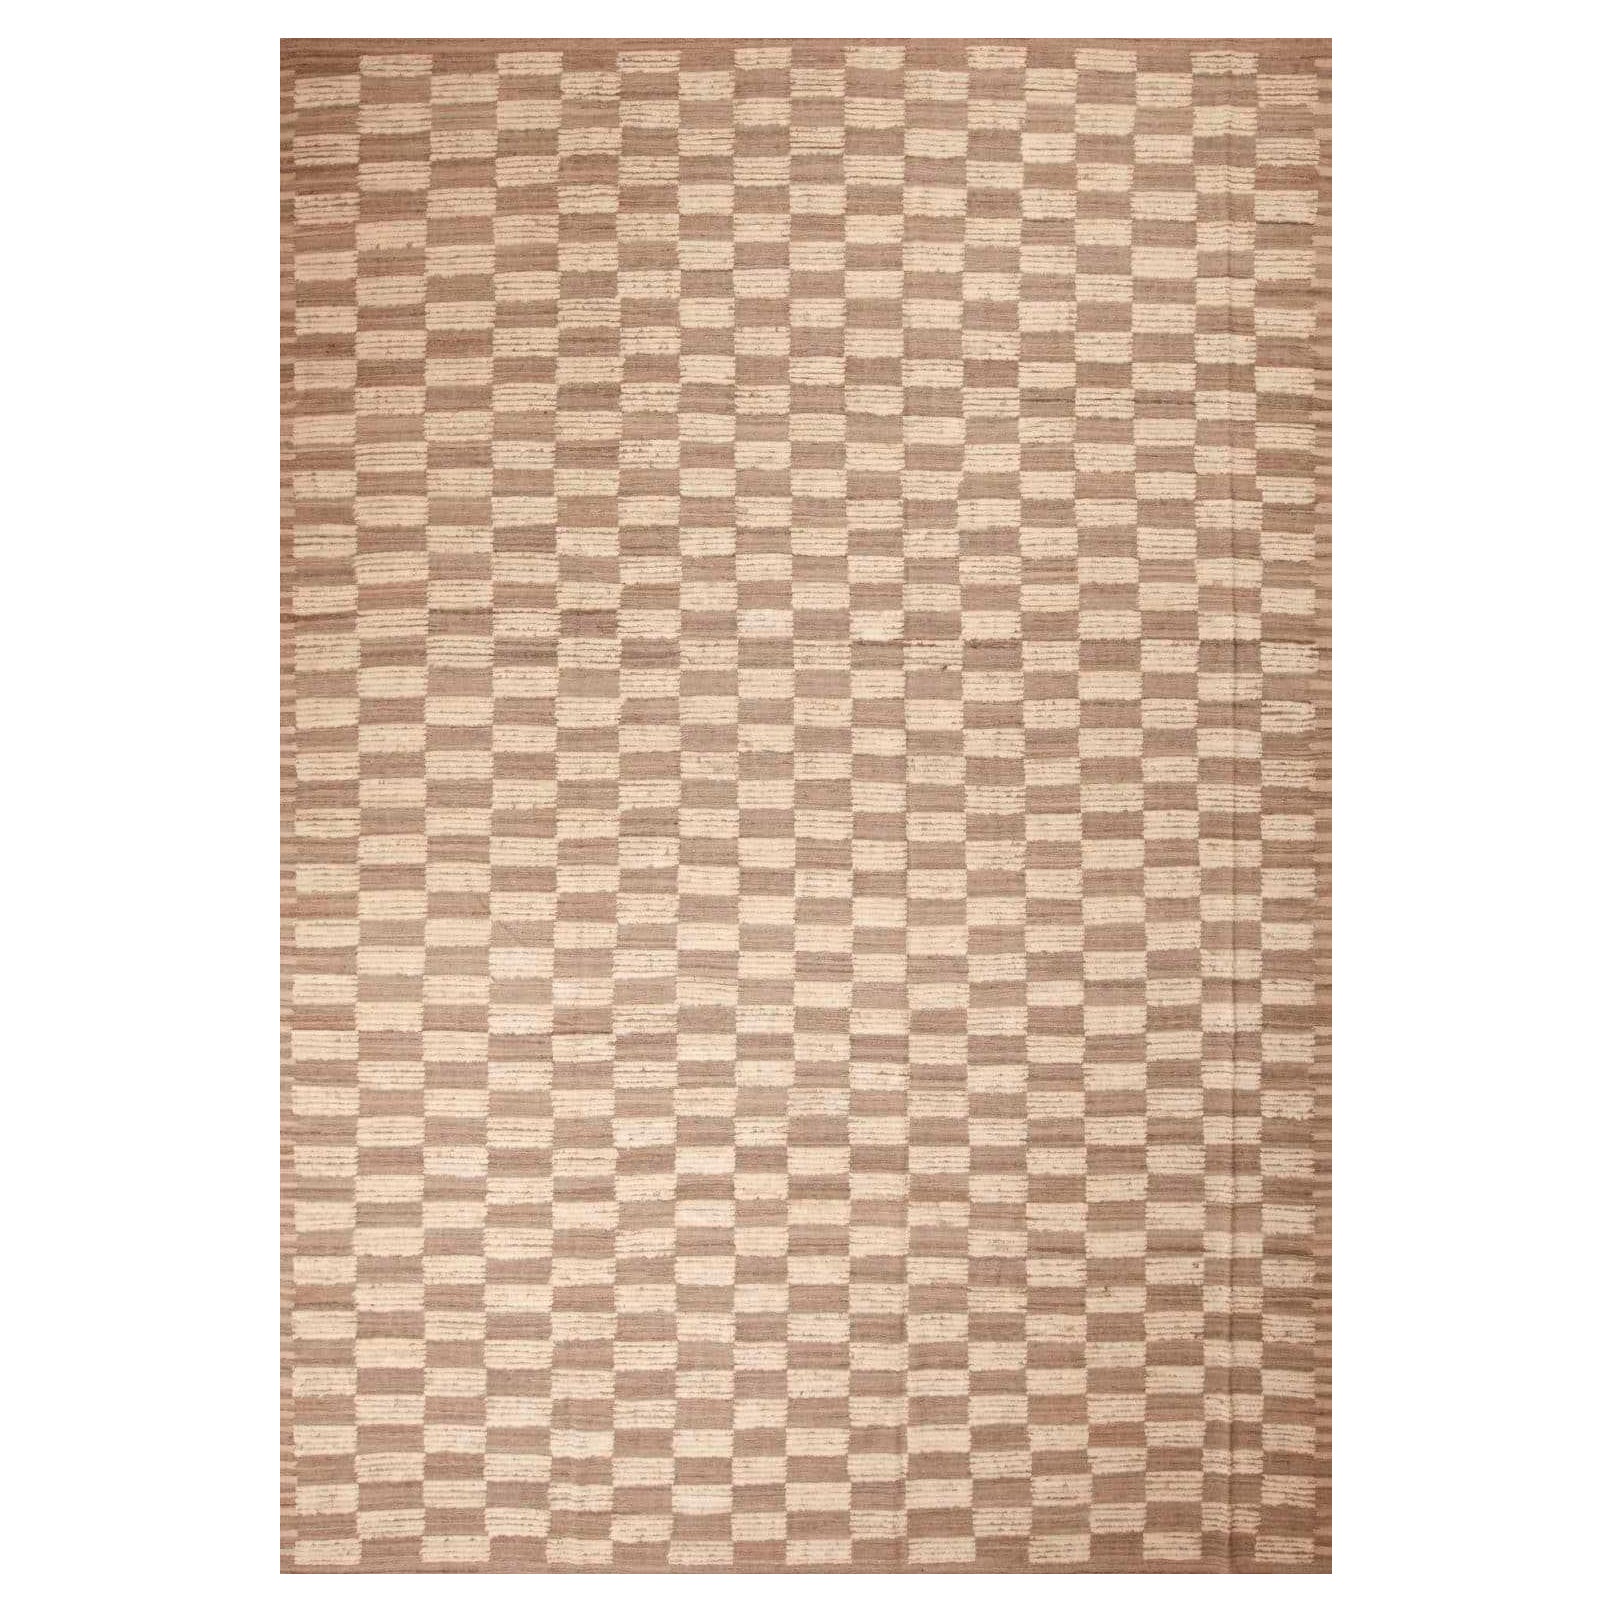 Nazmiyal Collection Geometric Checkerboard Pattern Modern Area Rug 10'5" x 14'9" For Sale